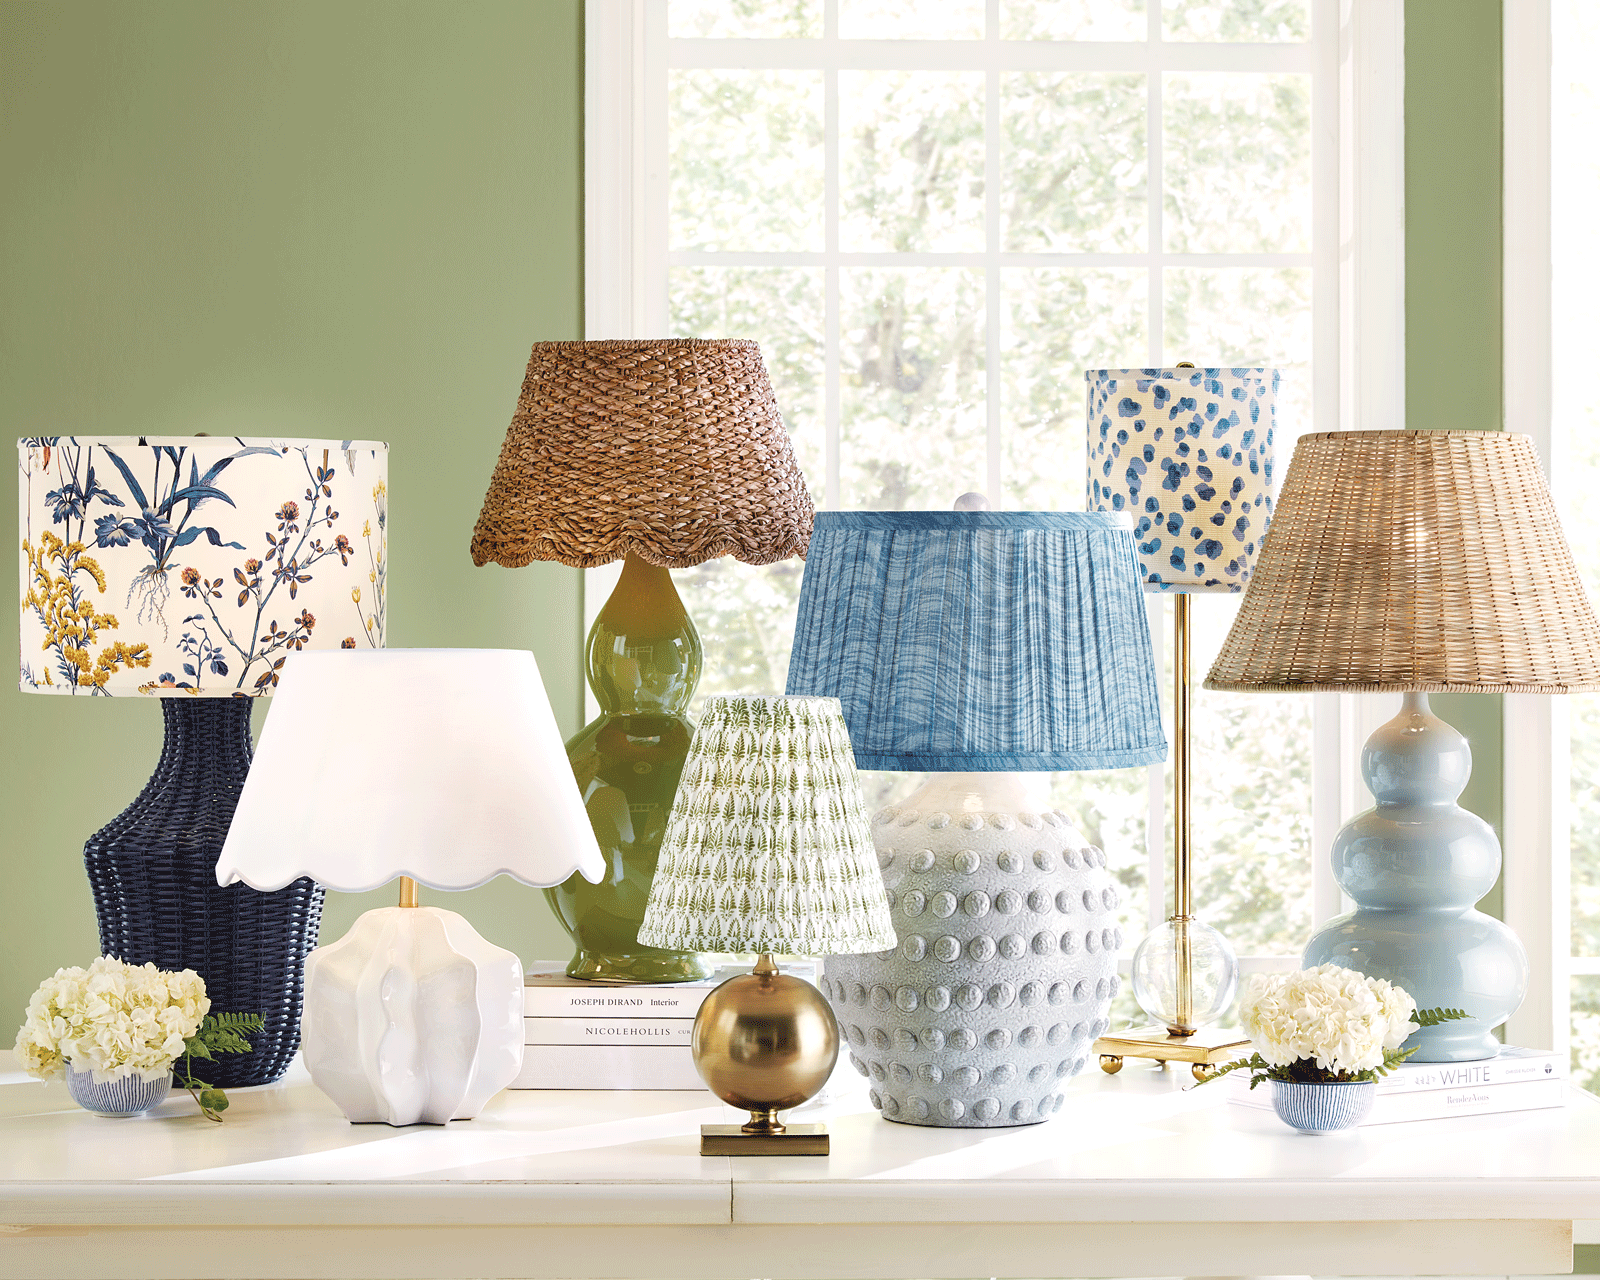 A group of lamps with unique fabric lampshades on a table in front of a green wall.